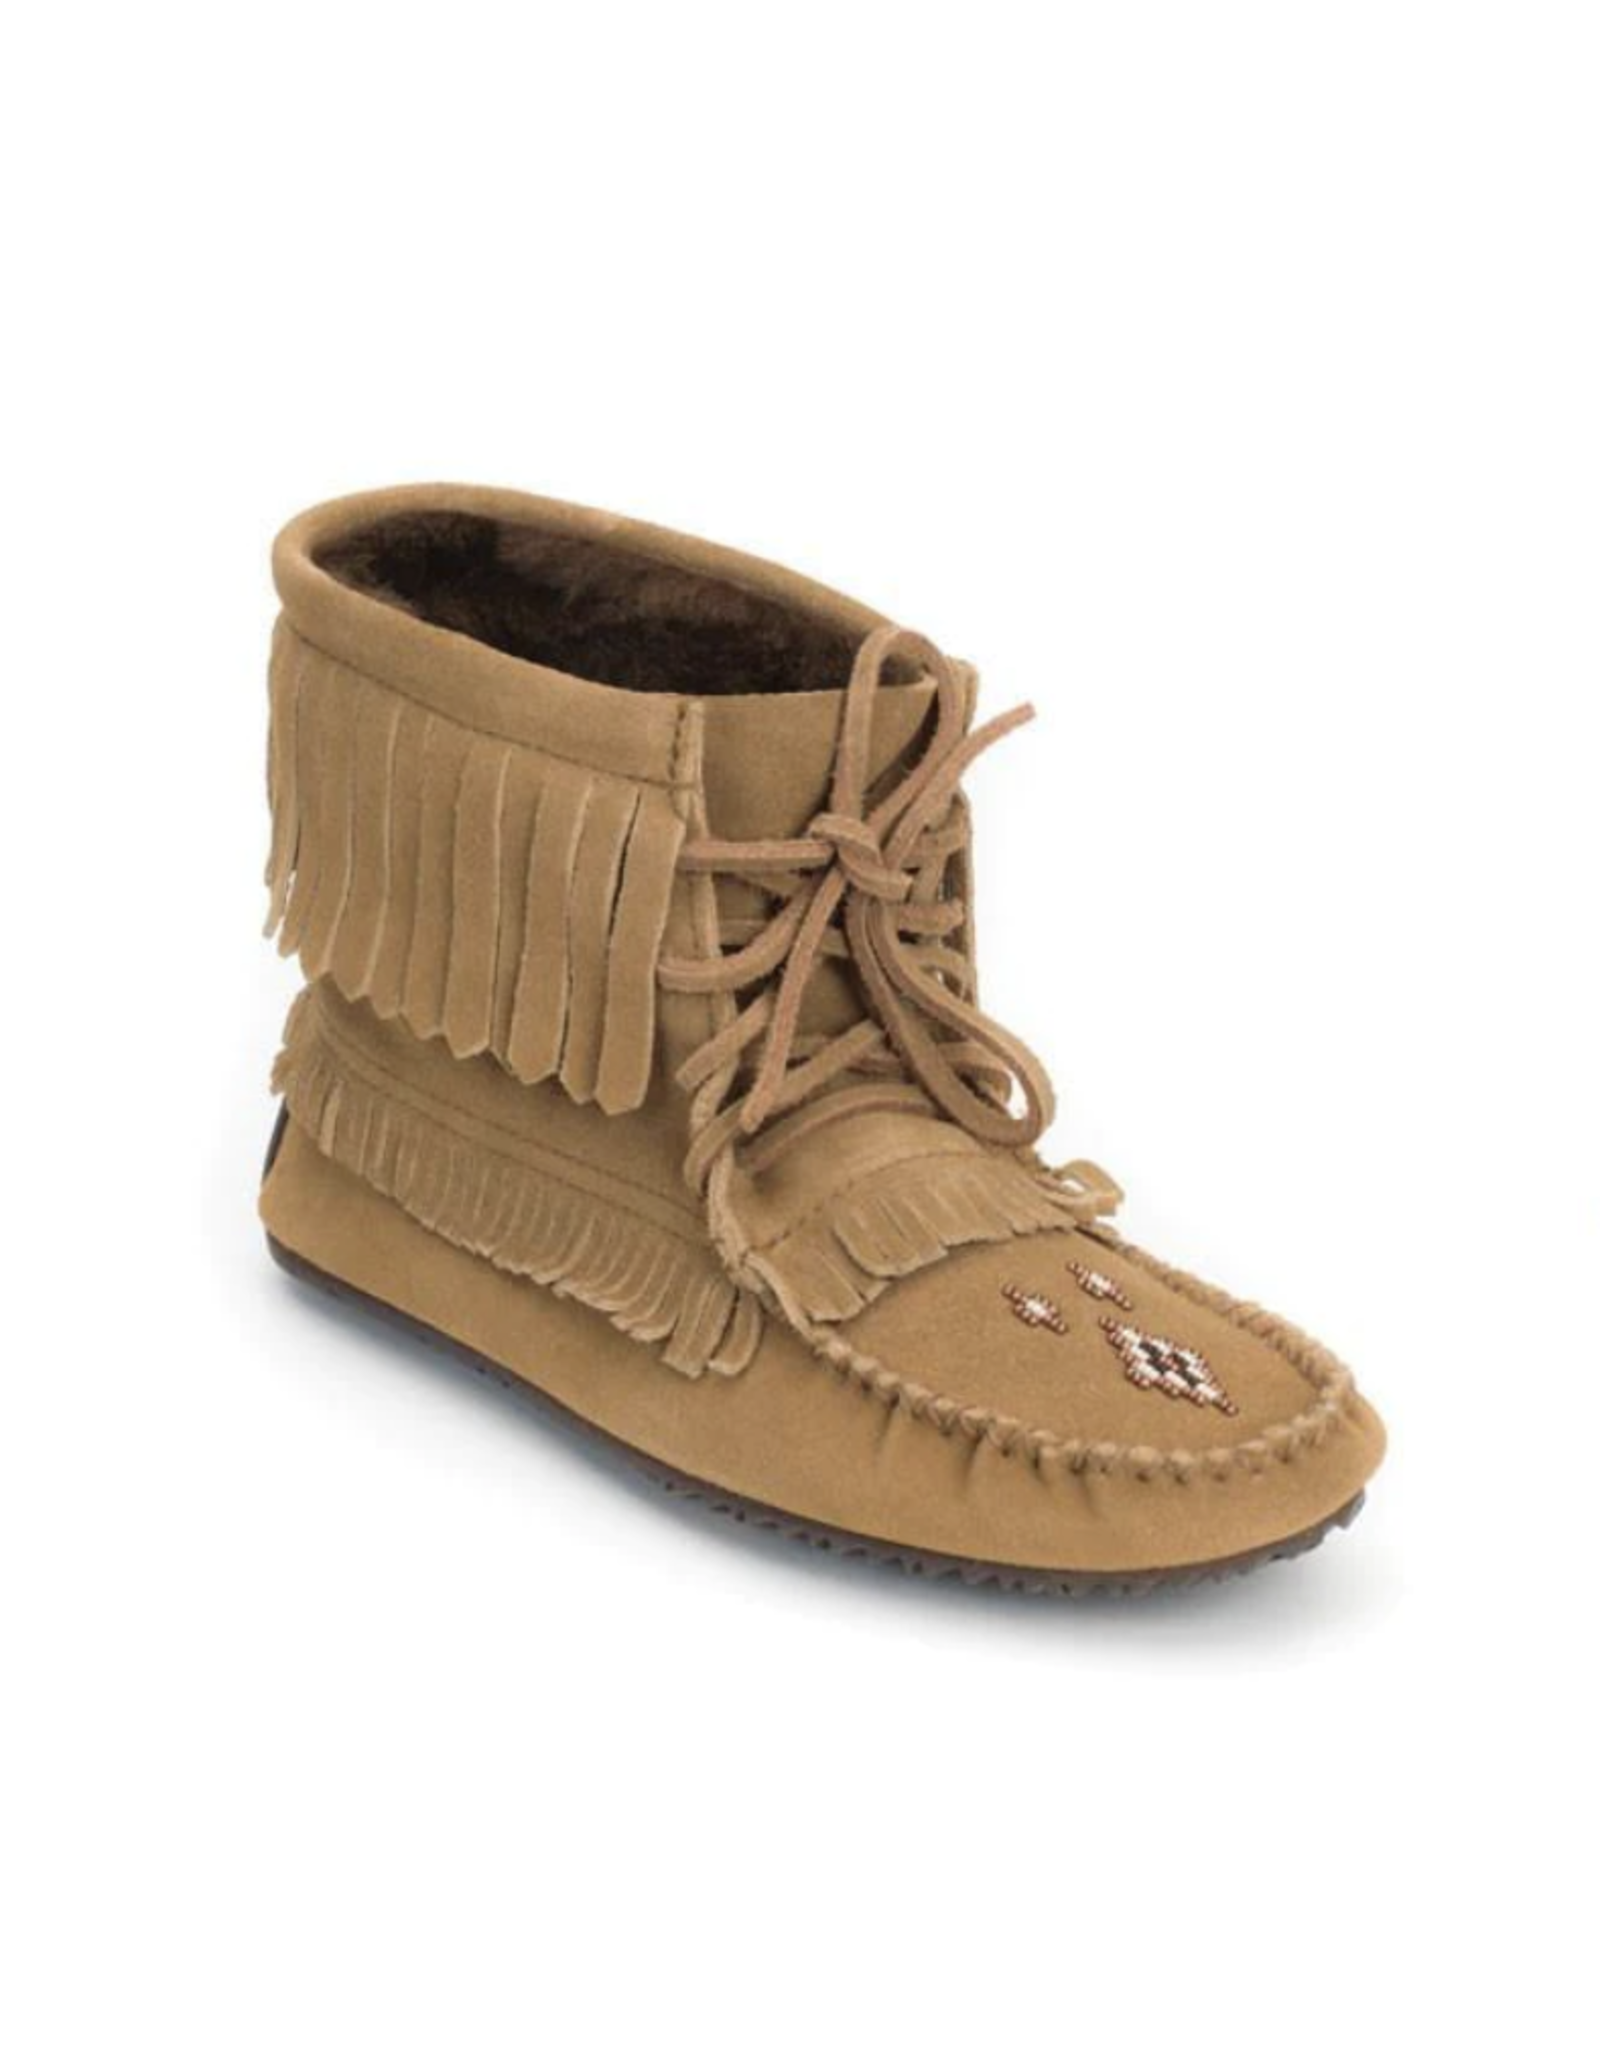 "Harvester" Suede Moccasin Boot (Lined)